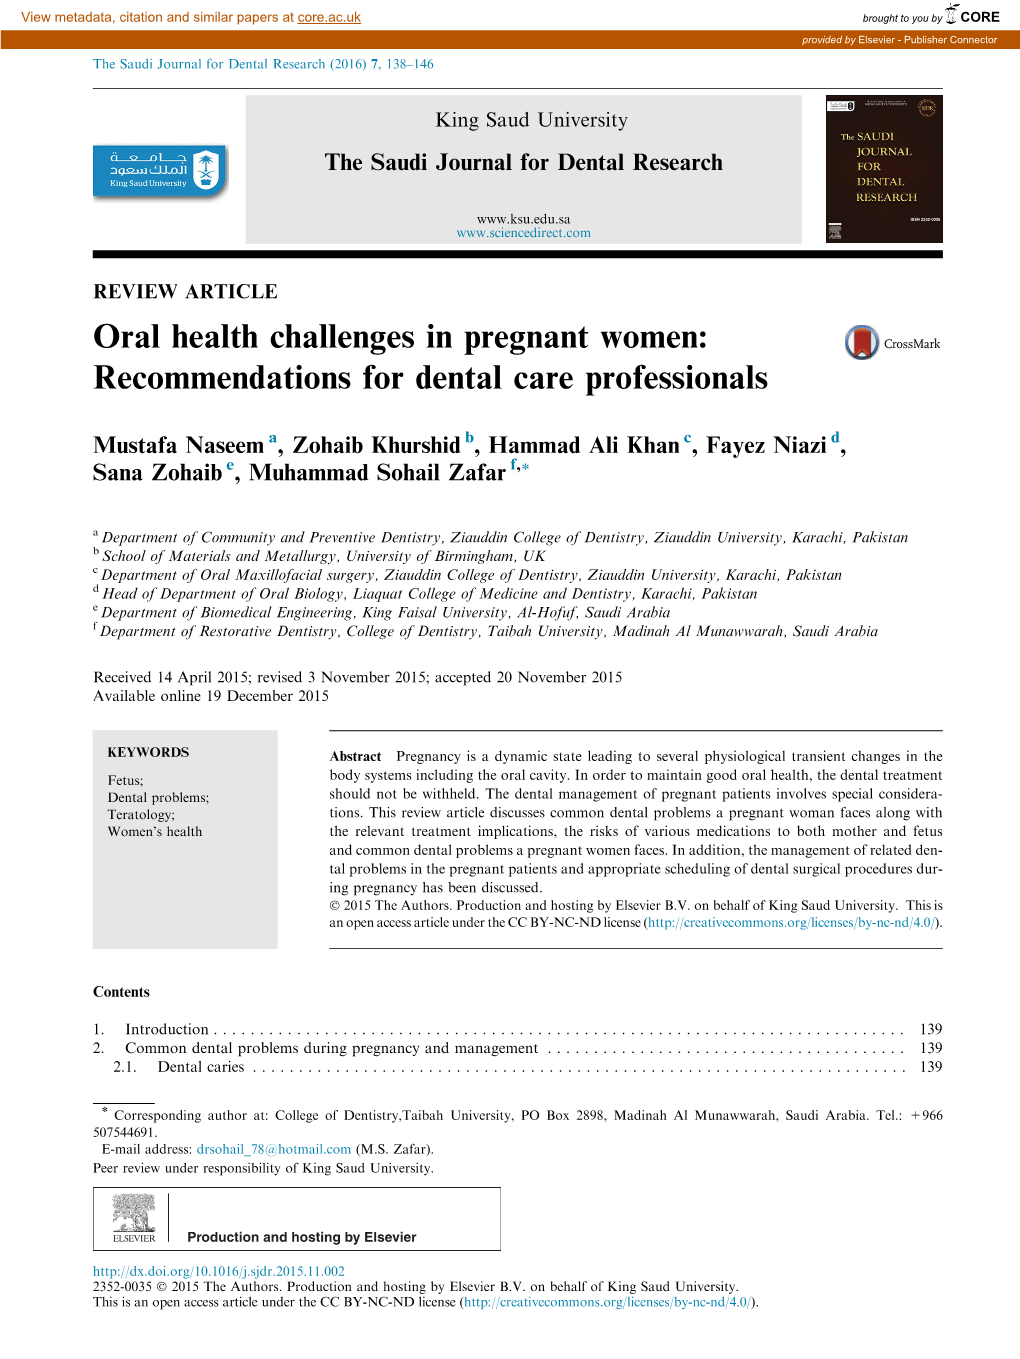 Oral Health Challenges in Pregnant Women: Recommendations for Dental Care Professionals